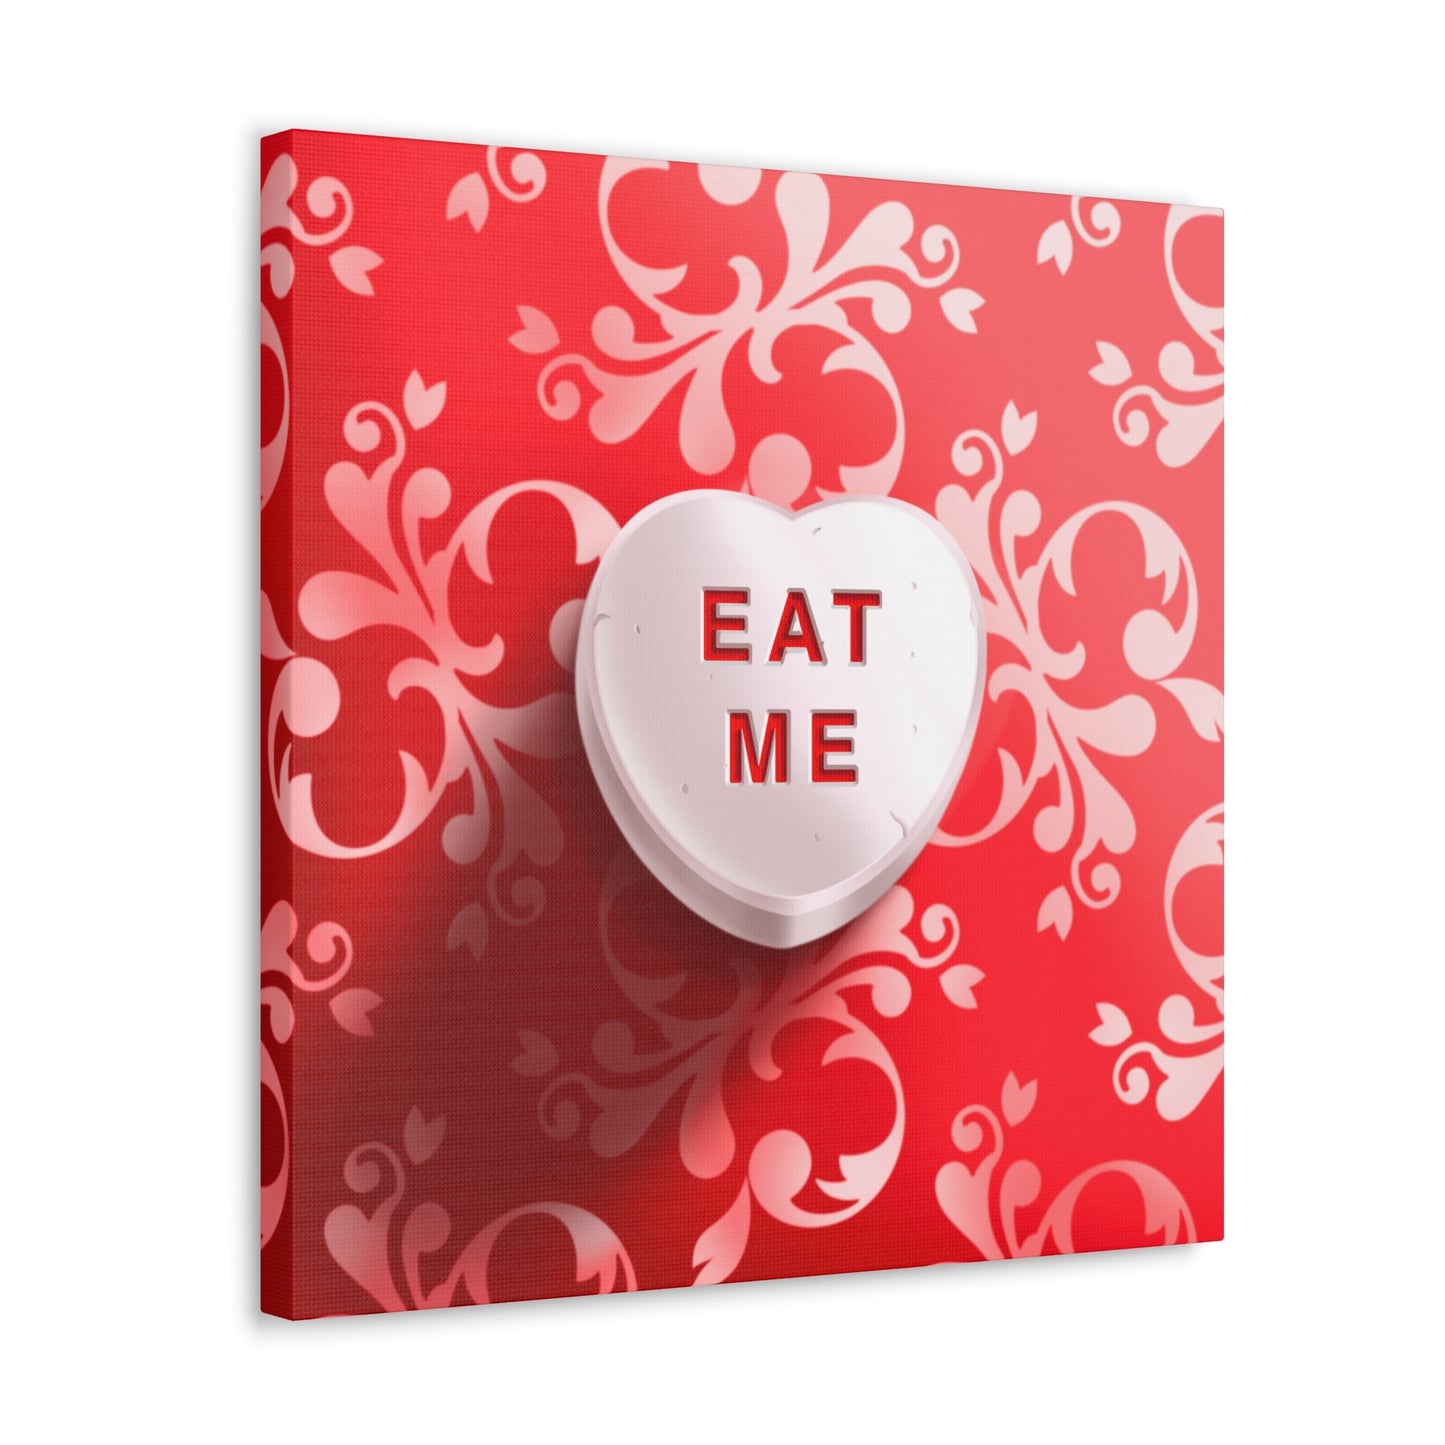 Eat Me - Canvas Gallery Wraps (Available in 4 colors)